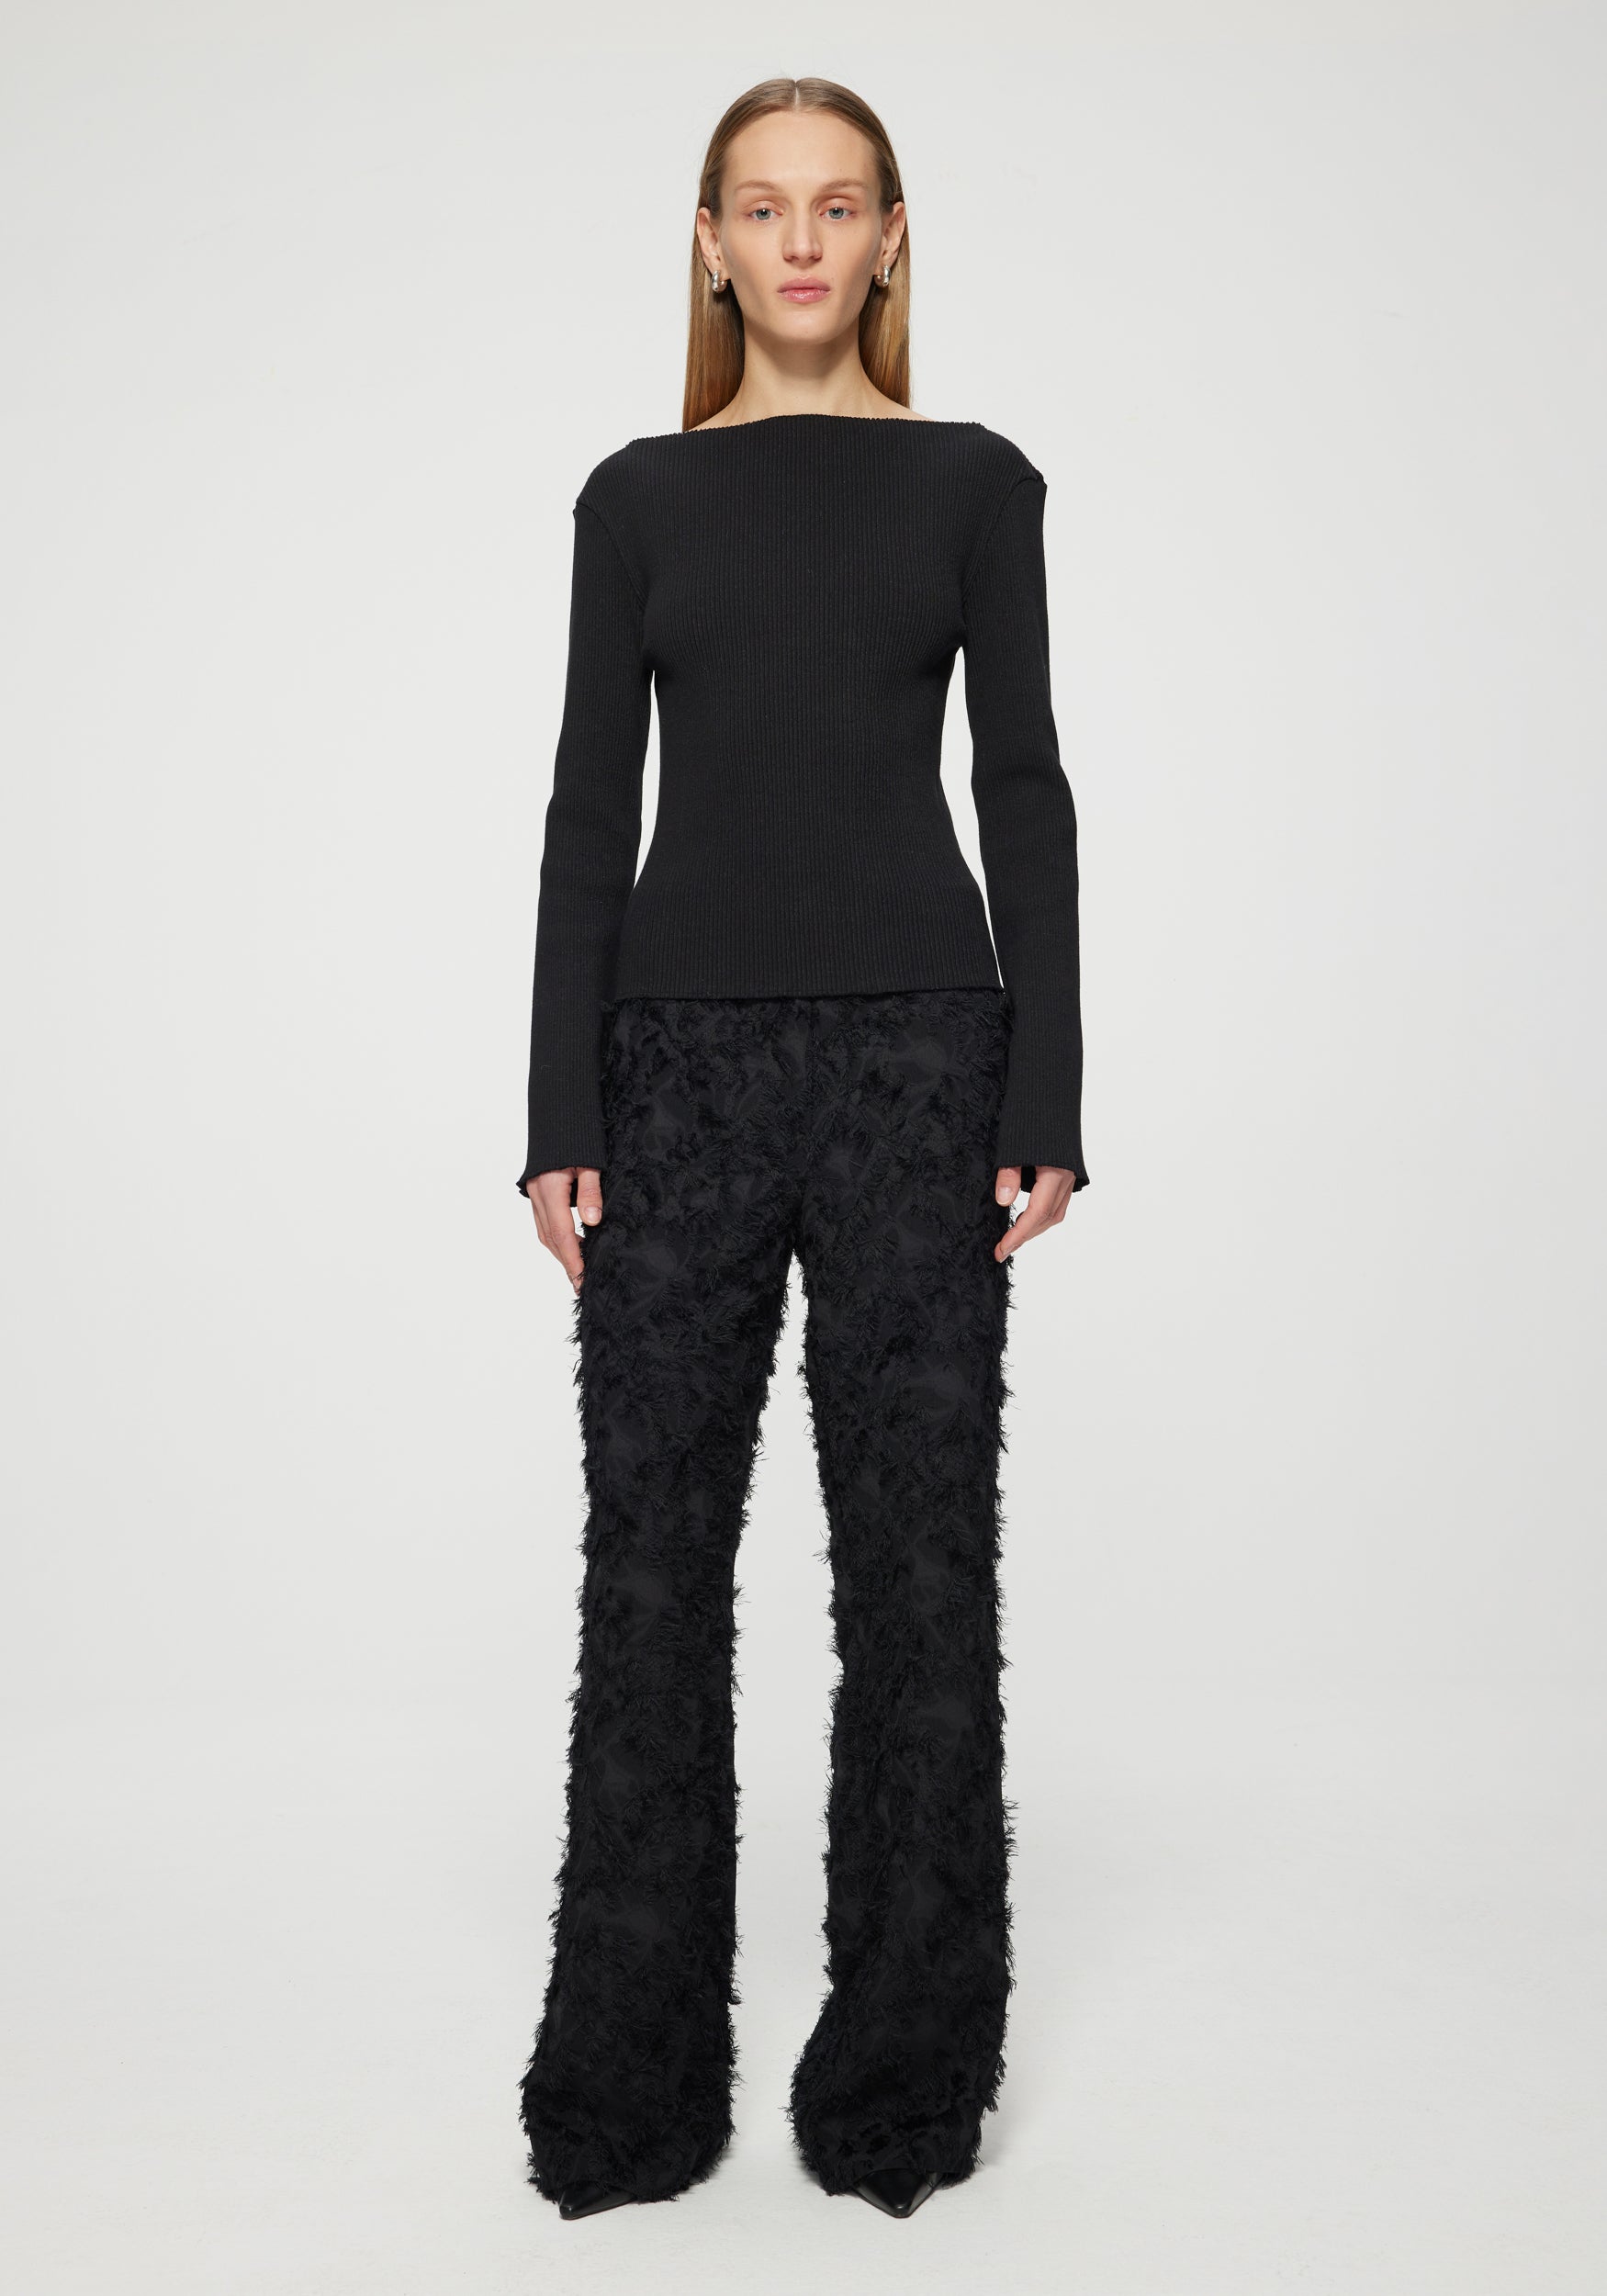 Rohe Ribbed Knit Top in Noir available at TNT The New Trend Australia